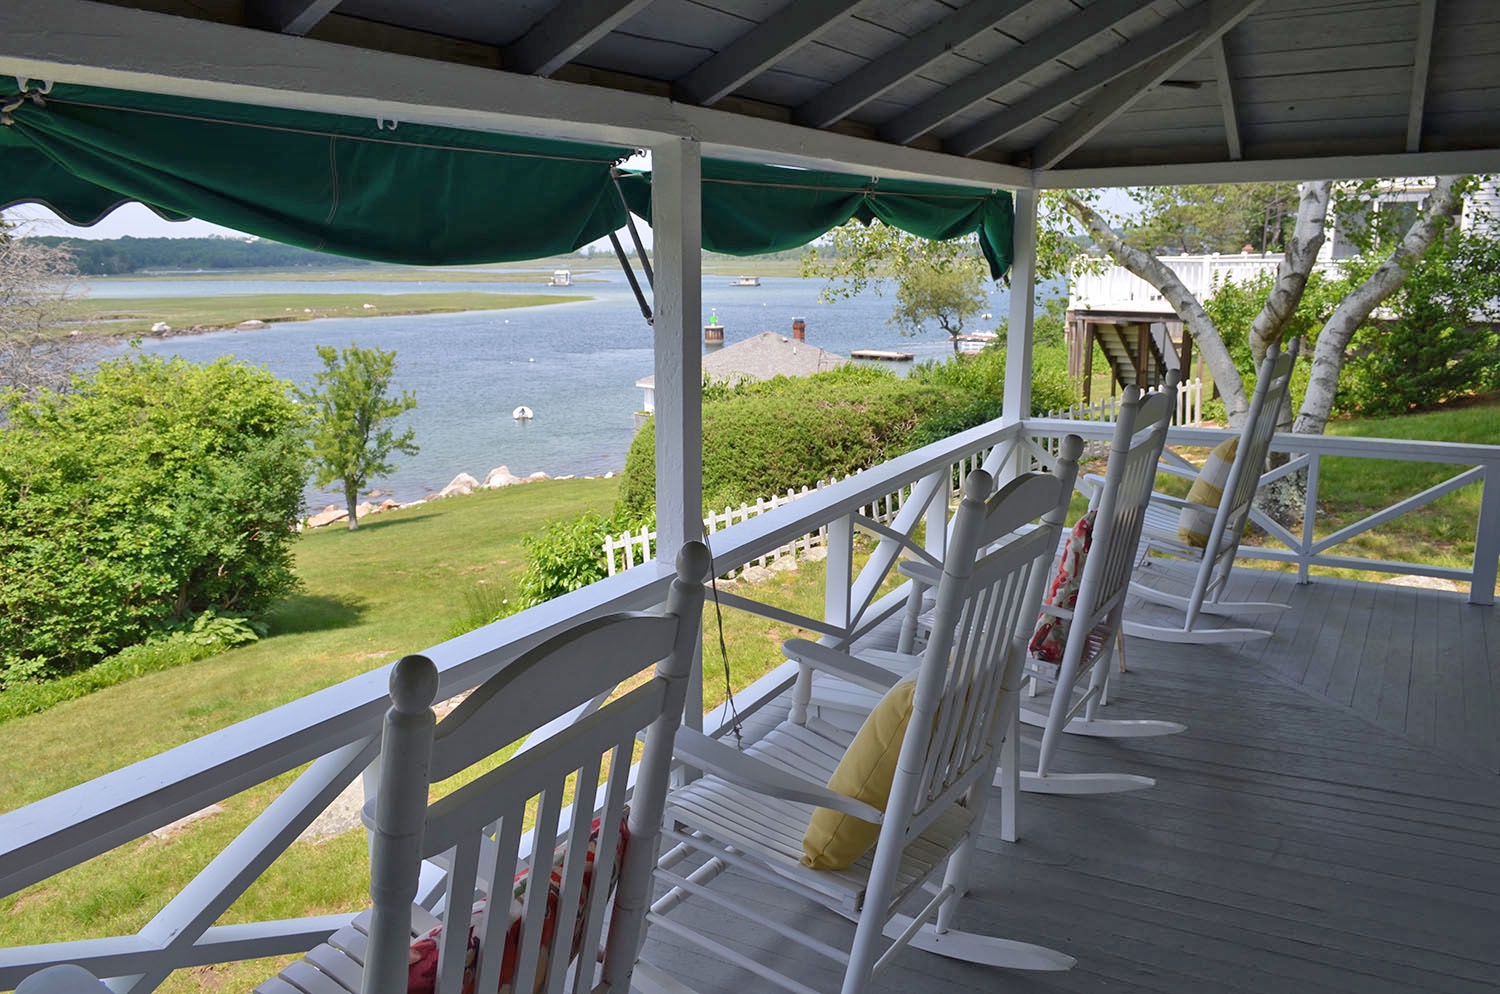 The back porch has wonderful views of the river.